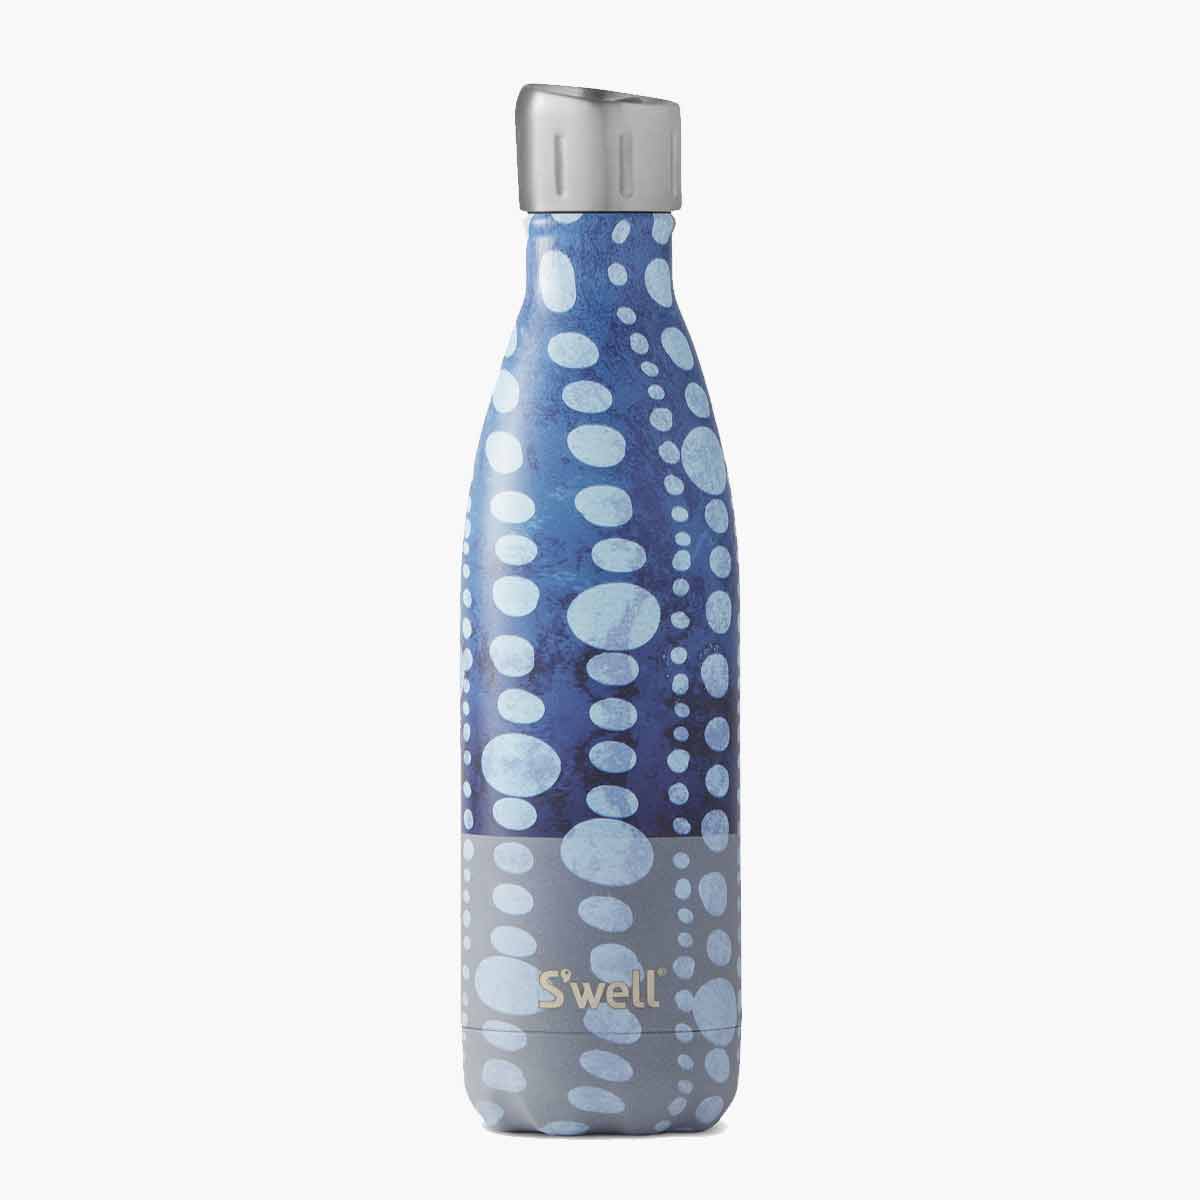 A blue and white polka dot patterned S'well water bottle.